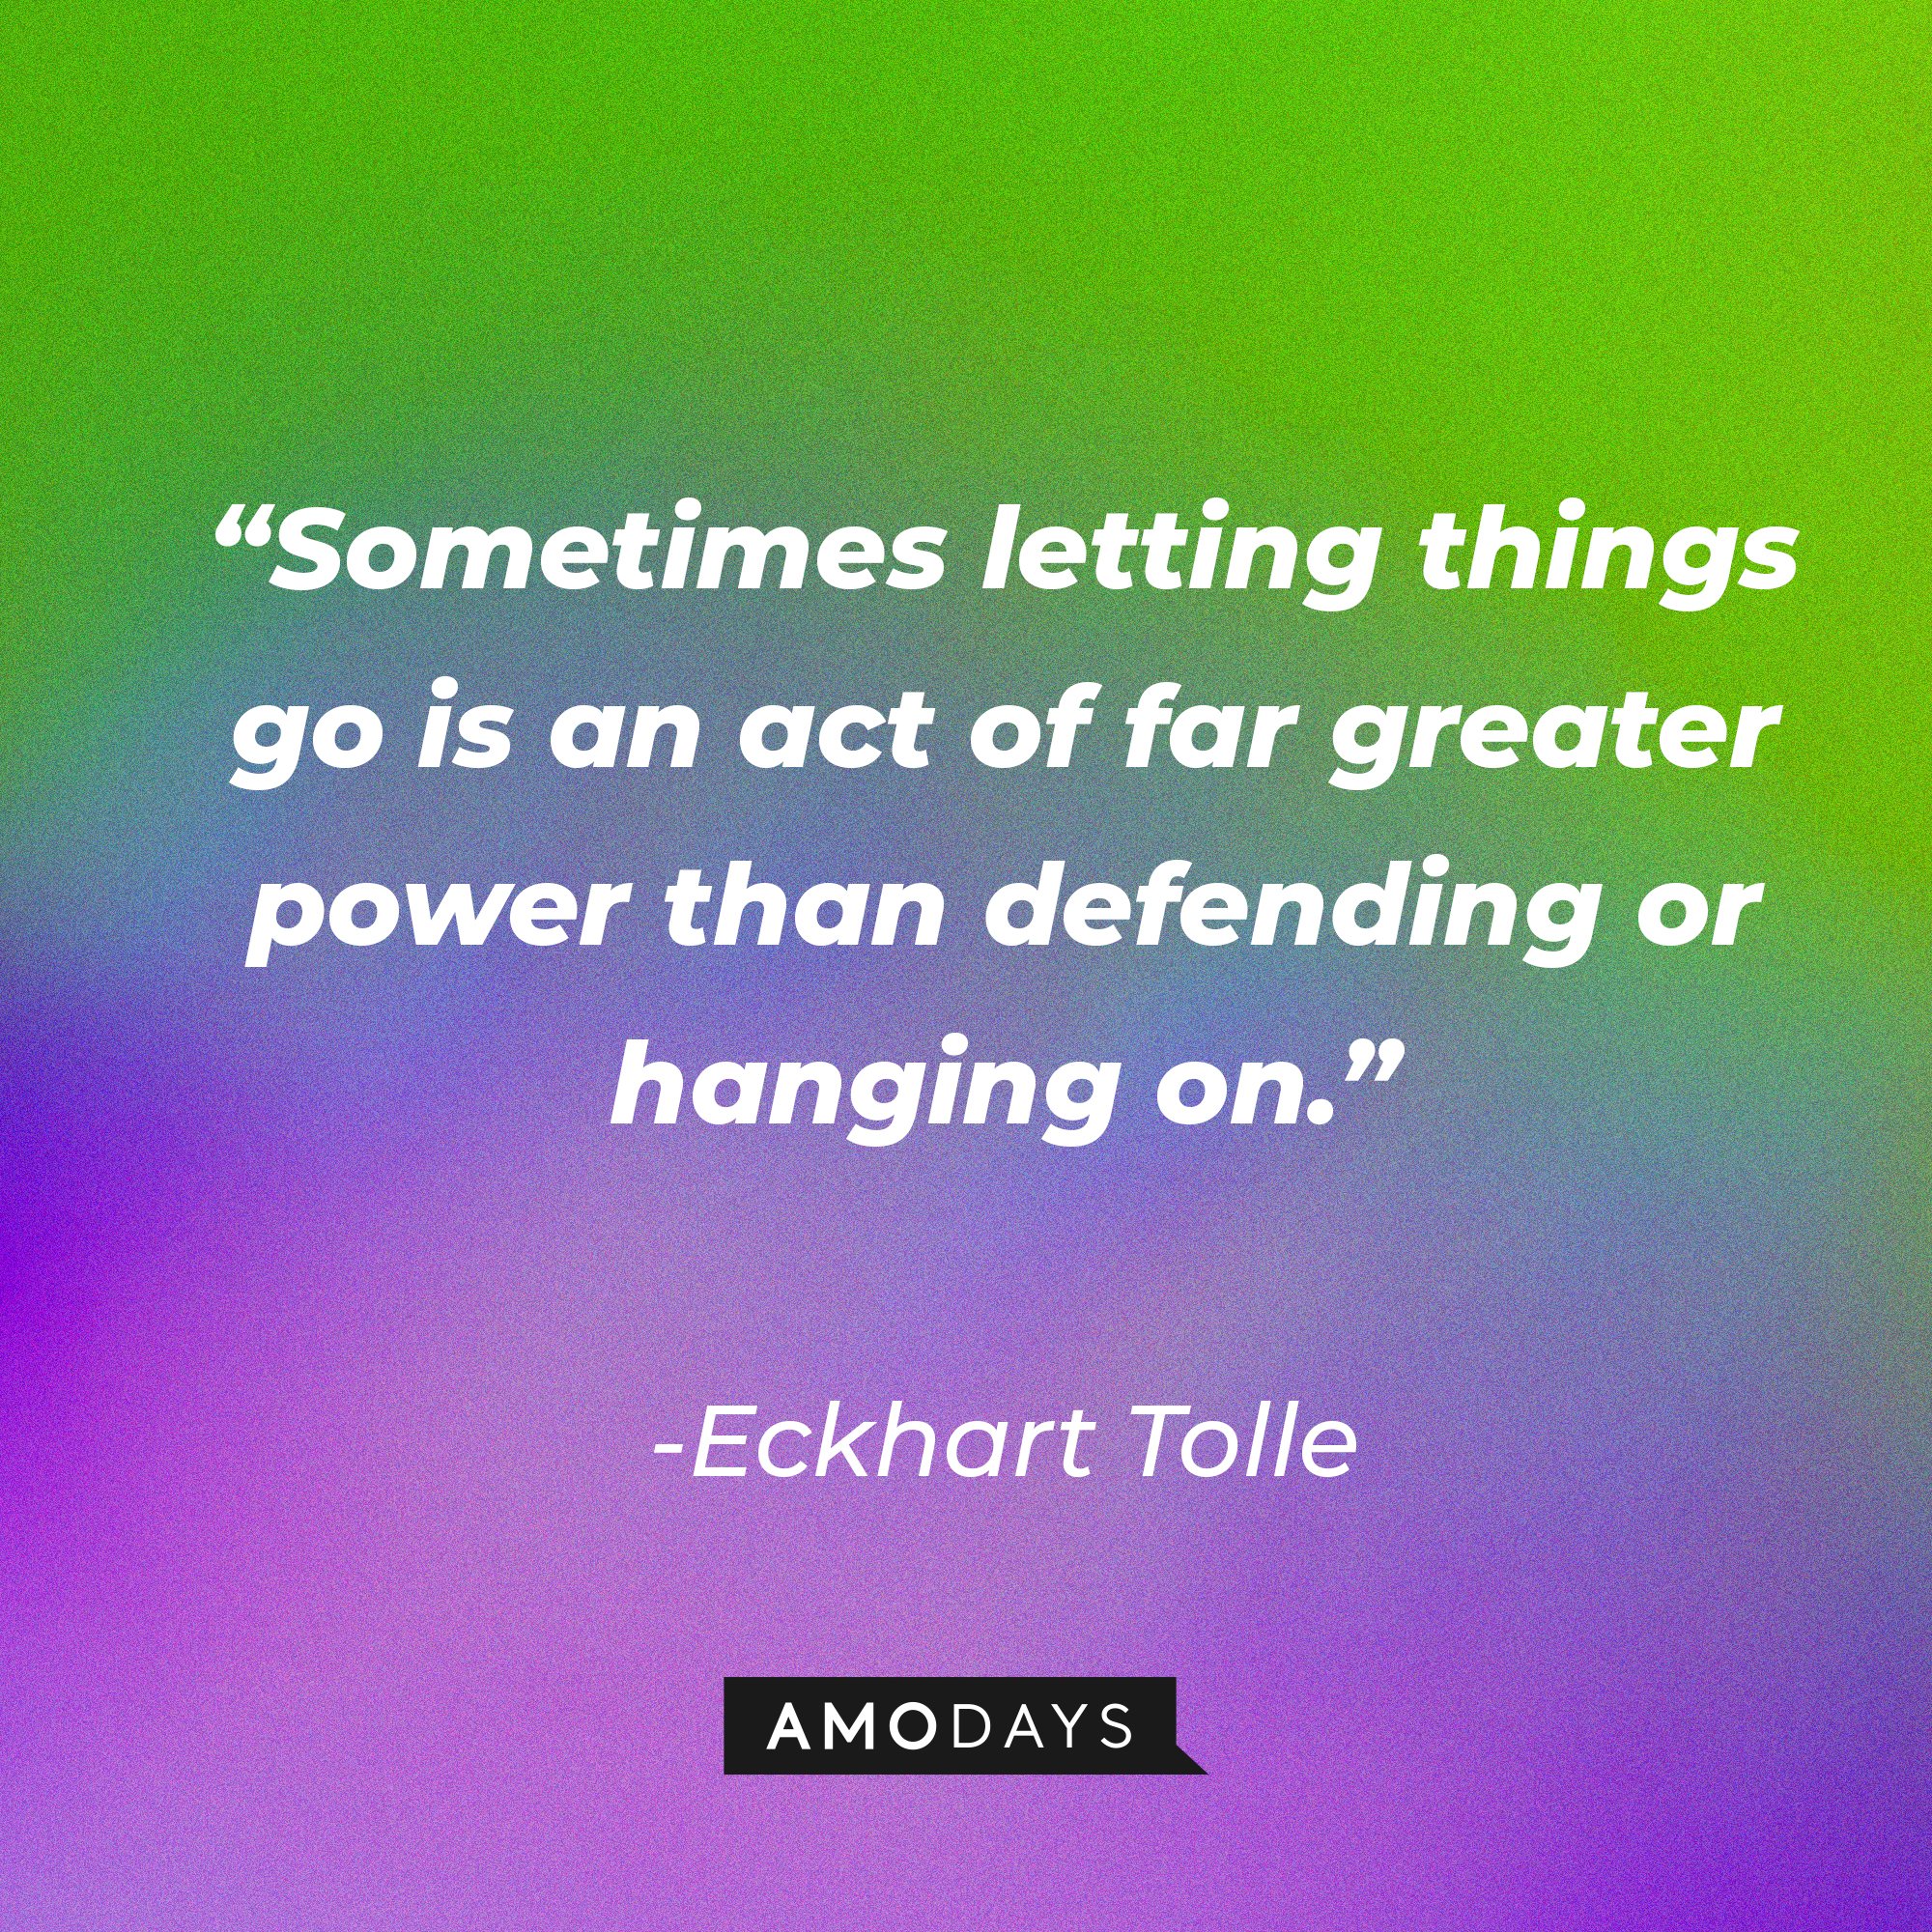 Eckhart Tolle's quote: “Sometimes letting things go is an act of far greater power than defending or hanging on.” | Image: AmoDays